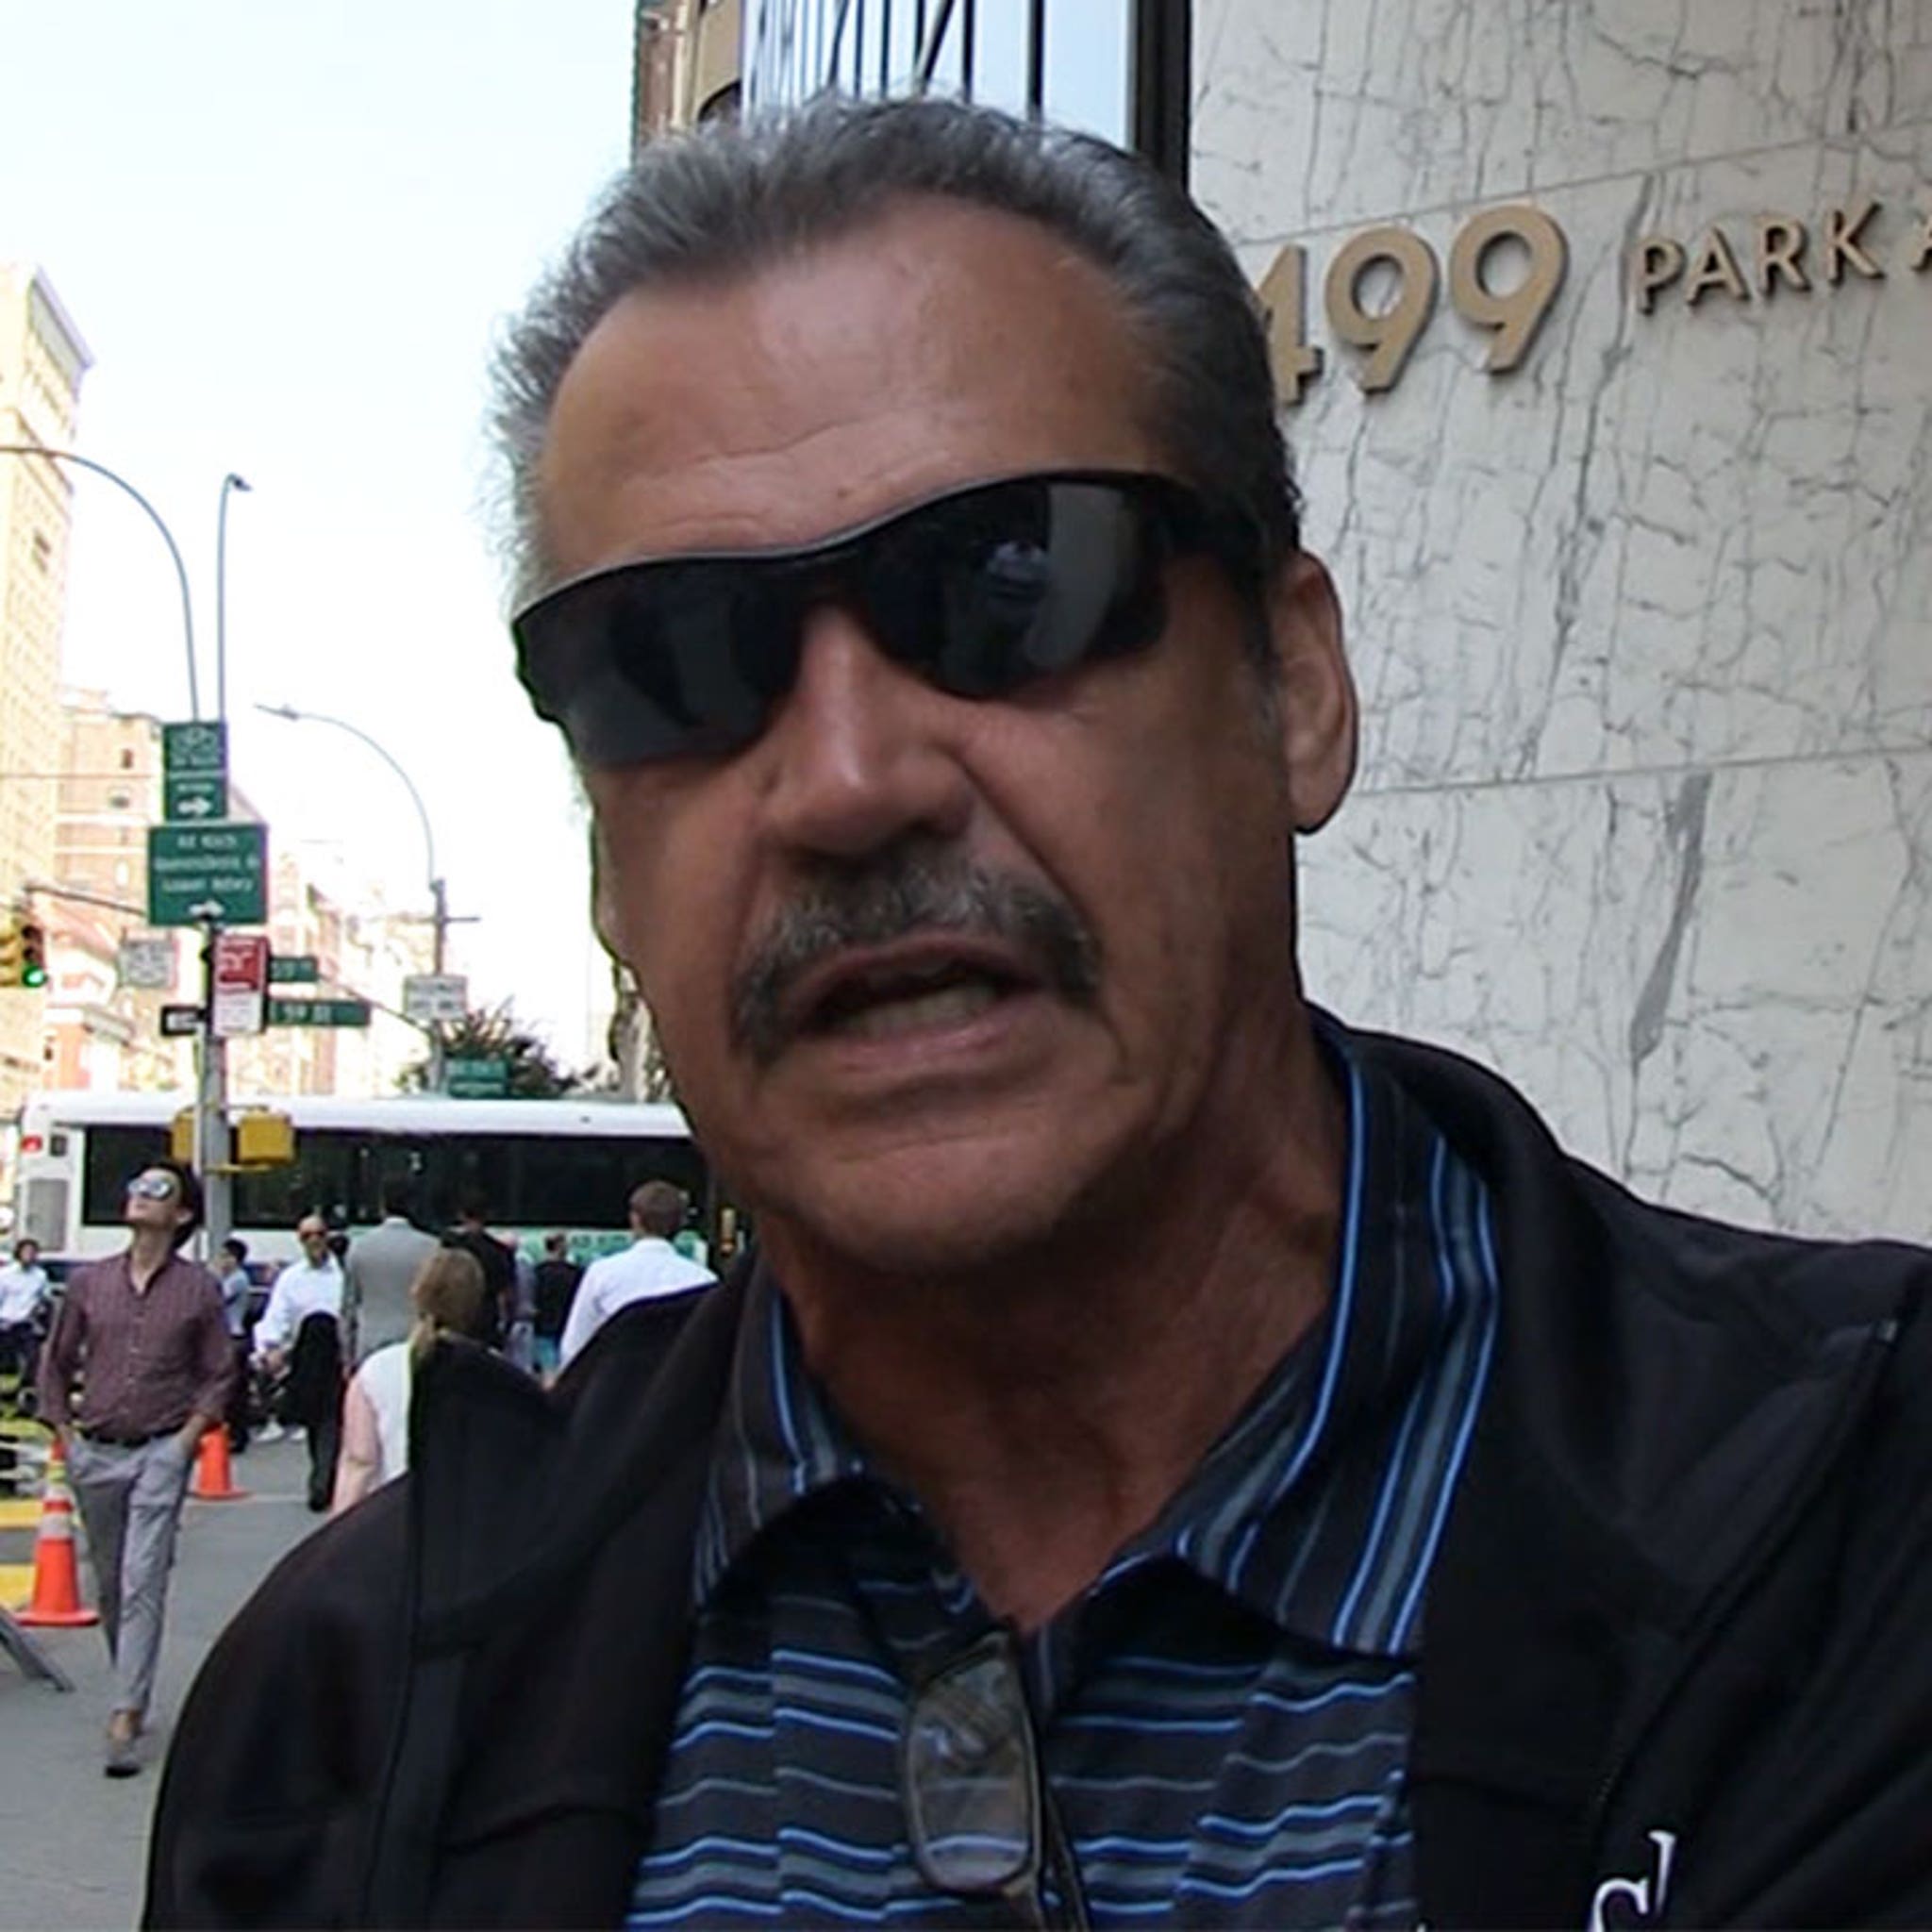 Yankees' Ron Guidry Blasts MLB Games, They're Too Long